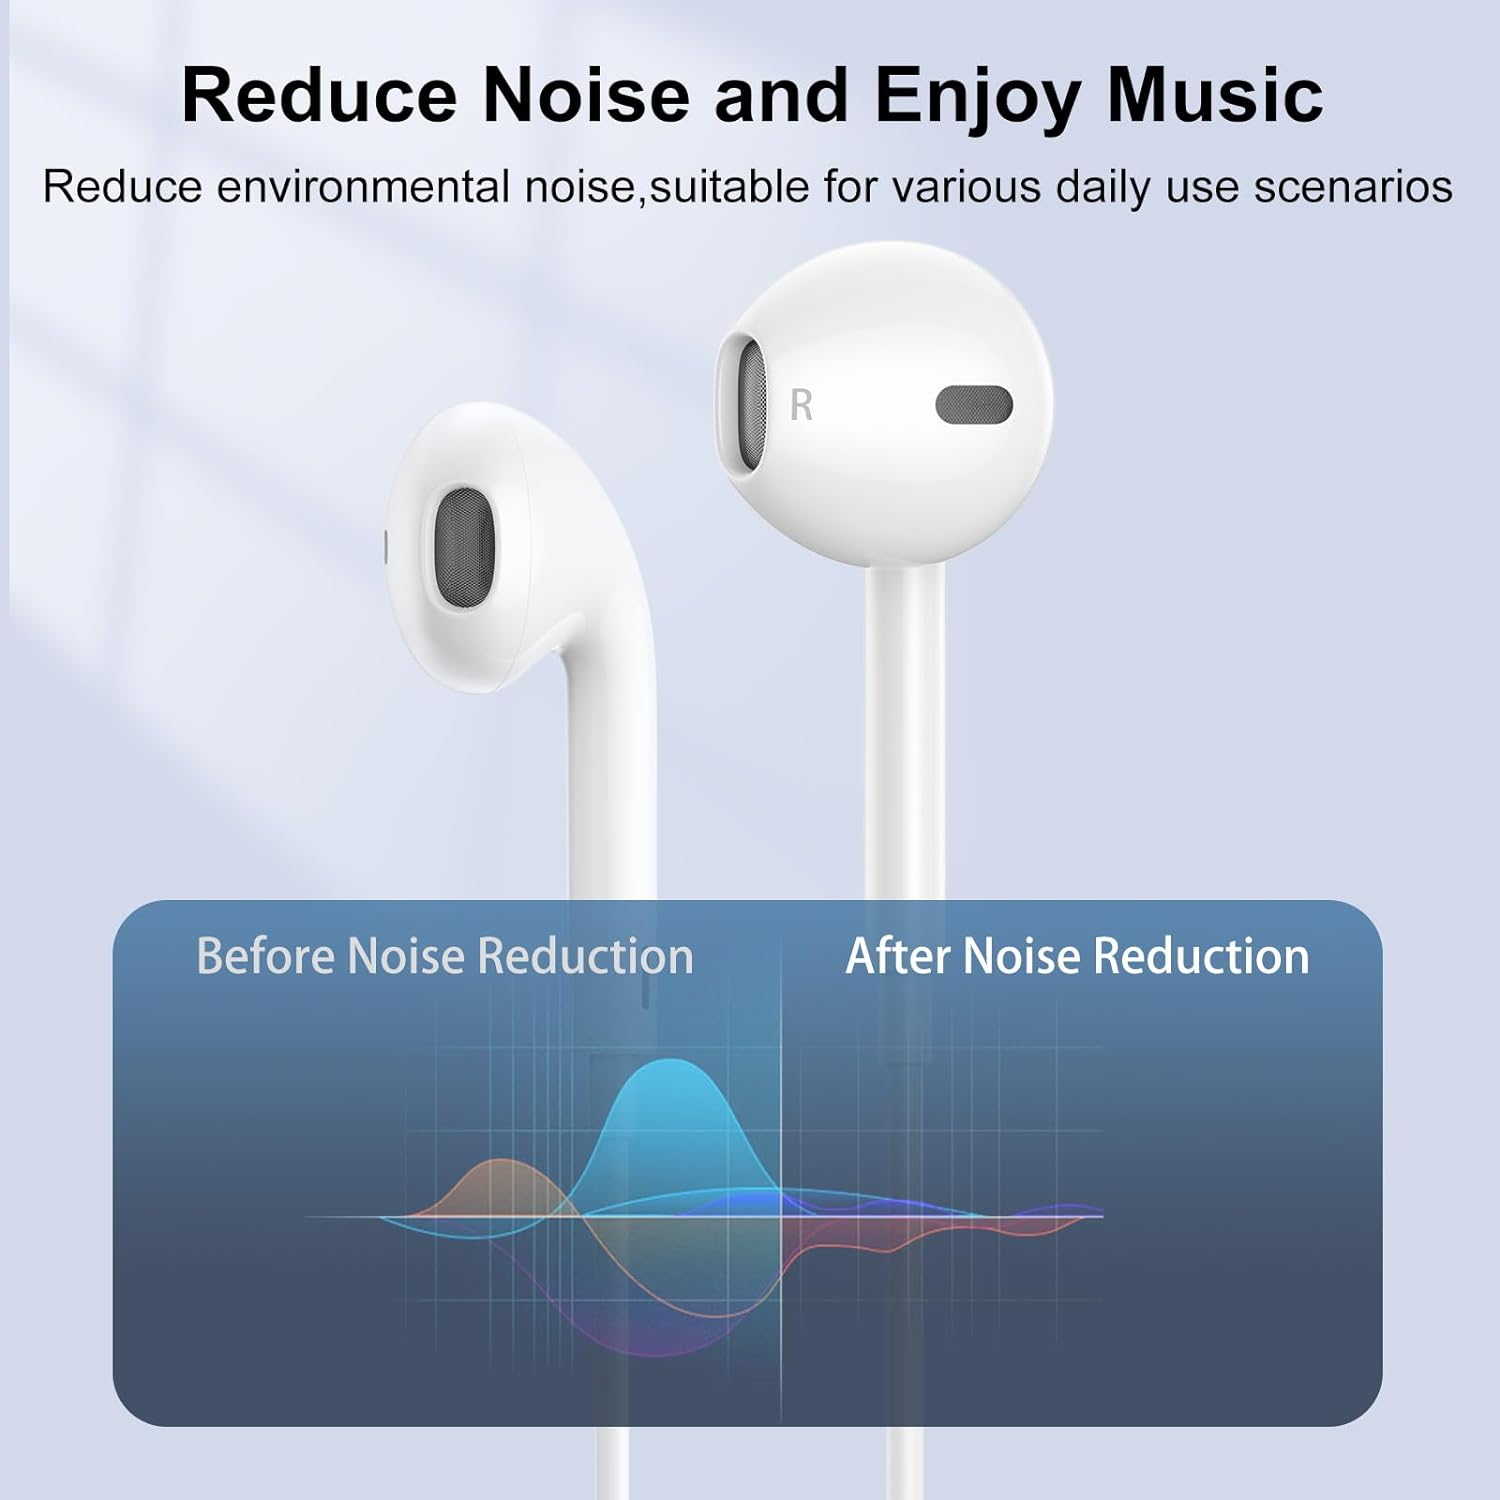 2 Pack - Apple Earbuds for iPhone Headphones: A Review of Comfort and Sound Quality